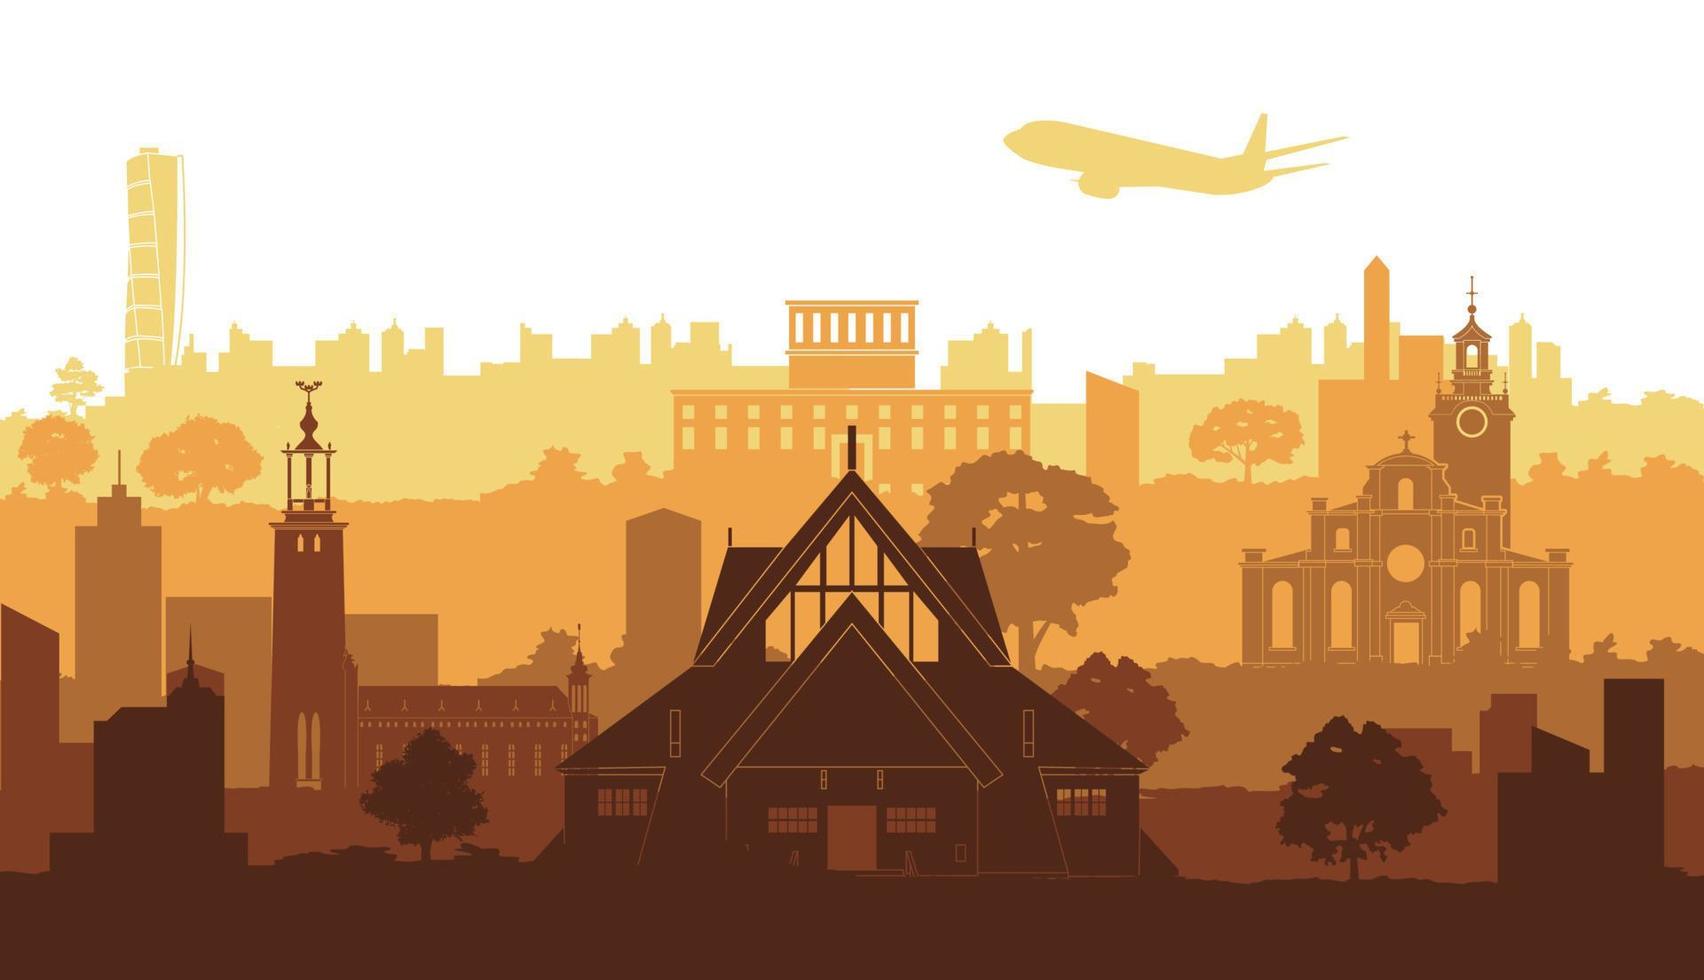 Sweden famous landmarks by silhouette vector